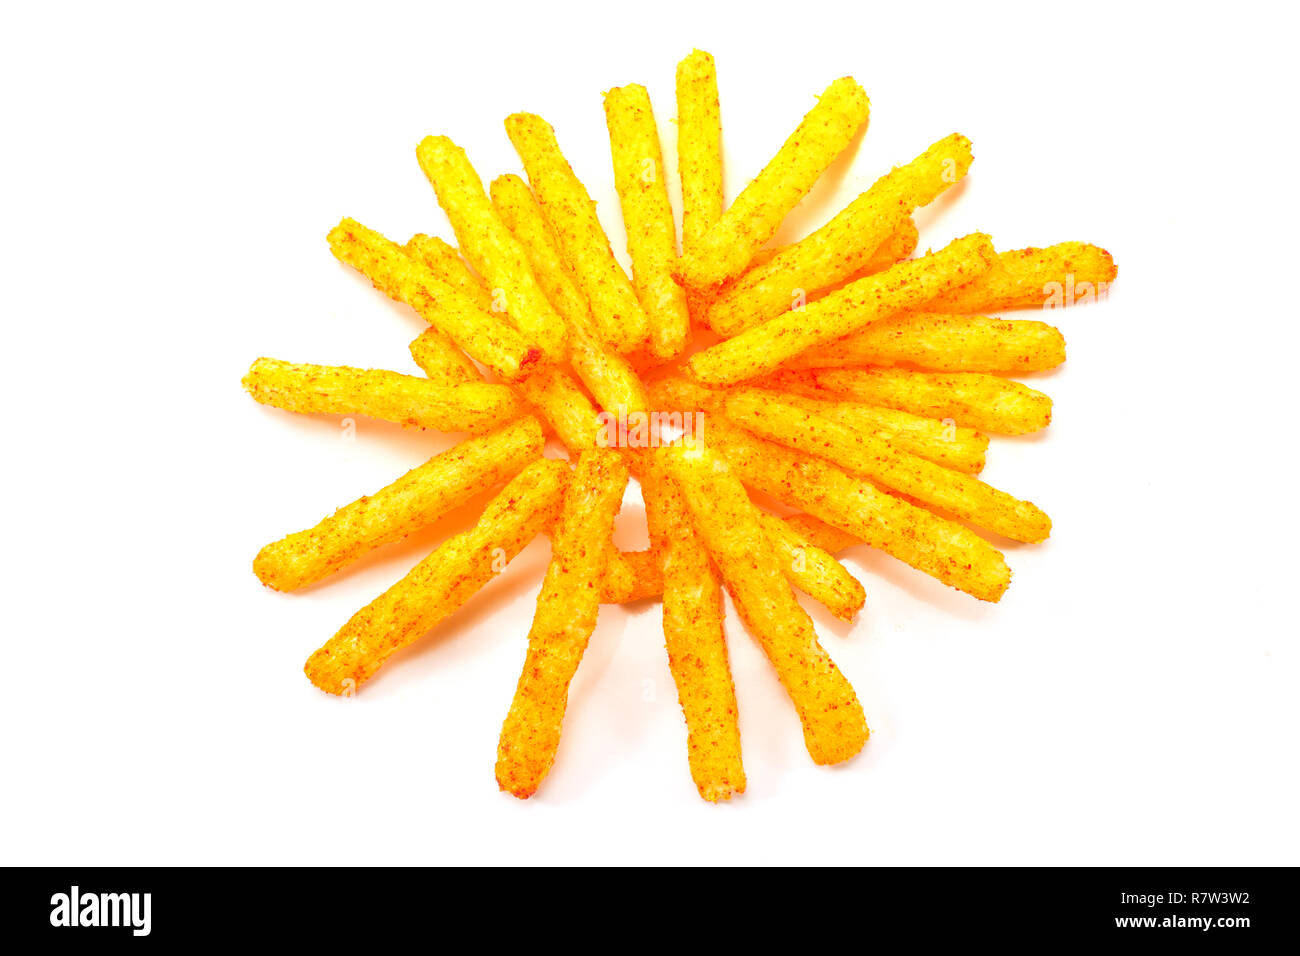 Chips isolated on white background Stock Photo